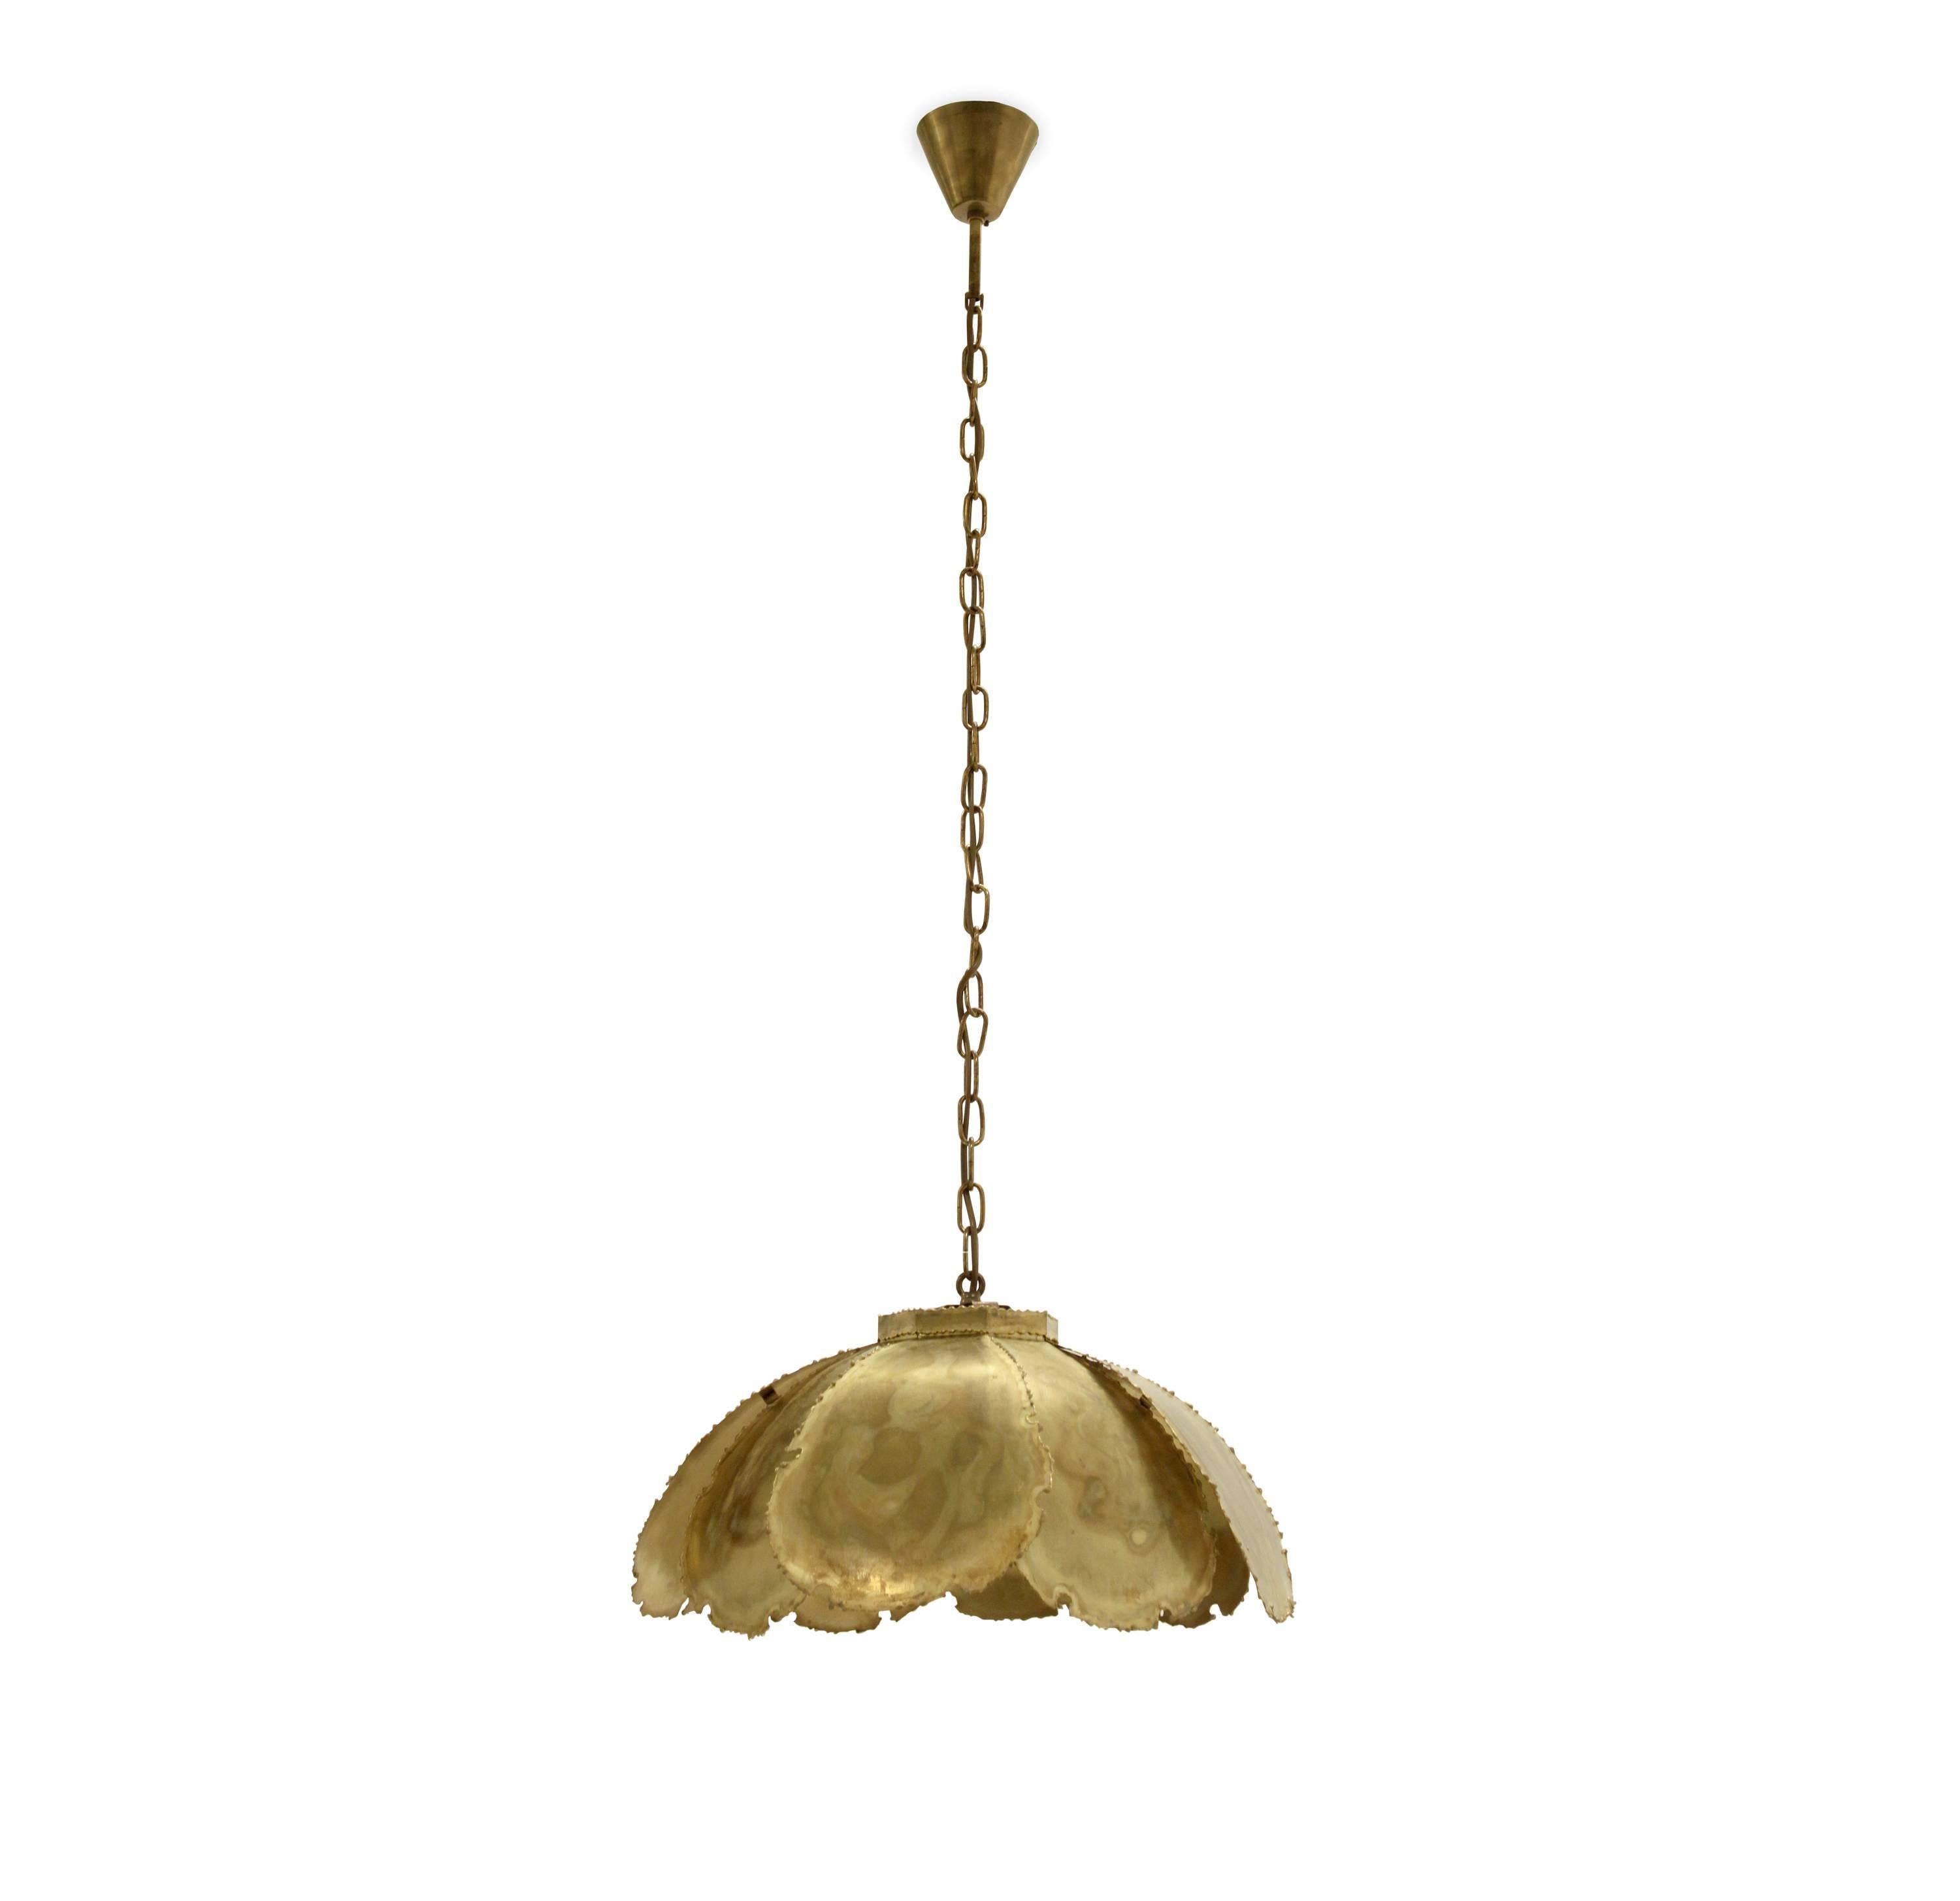 Mid-Century Modern Scandinavian Ceiling Light in Brass by Svend Aage Holm Soresen, 1970s For Sale